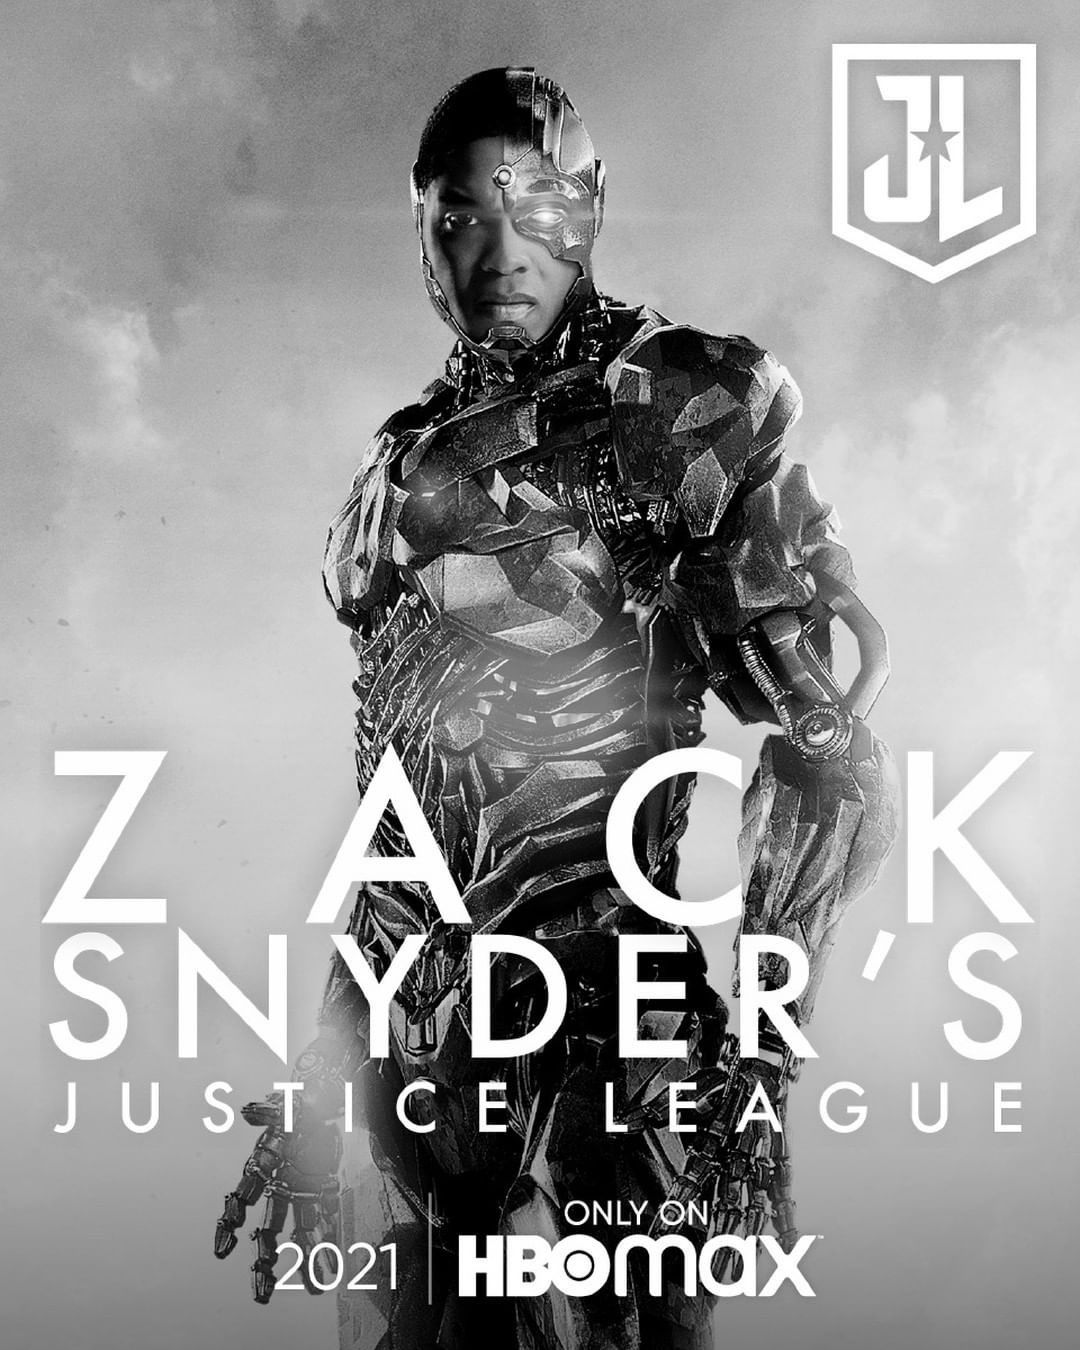 Zack Snyder's Justice League Poster, ray Fisher as Cyborg: DC extended universe photo